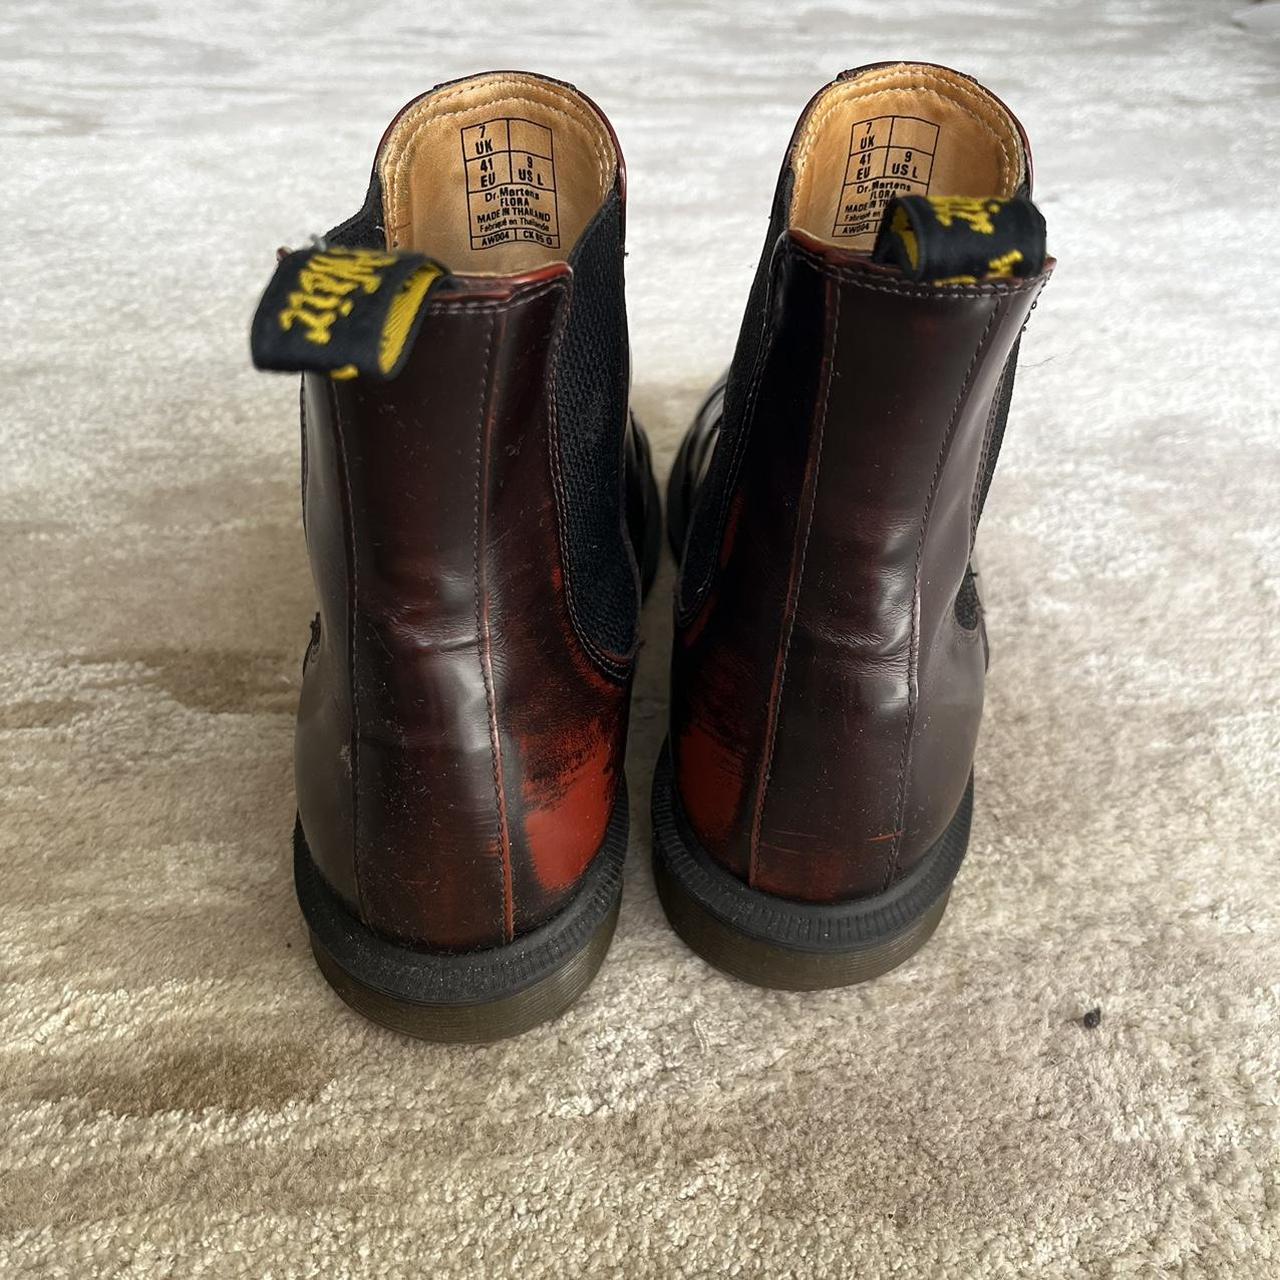 Dr. Martens Women's Brown and Red Boots (4)